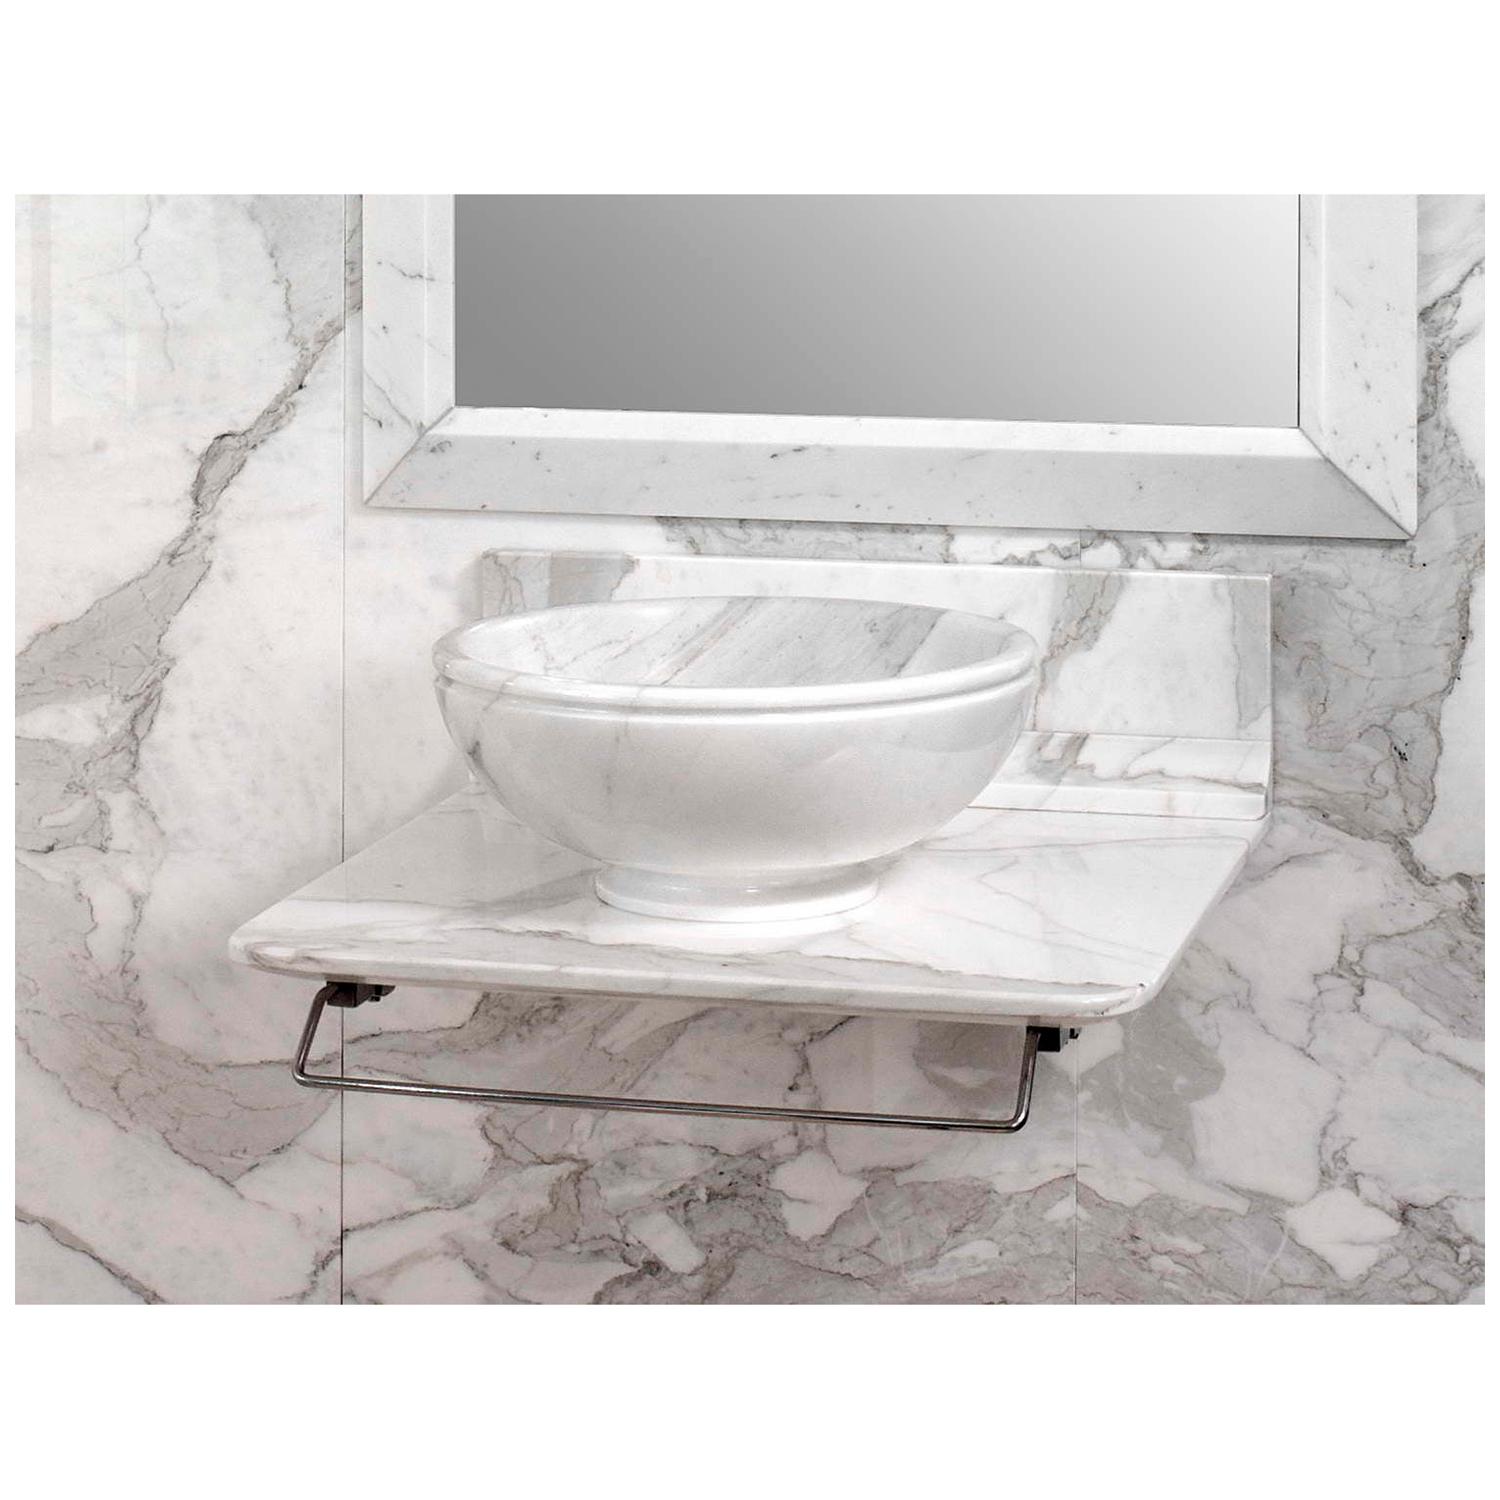 Agrippa marble washbasin with top designed by arch. Michele de Lucchi & Philippe Nigro.

Size washbasin: Cm diameter 40 x height 17
Size top: Cm 60 x 60 x H 3
Materials: Bianco Carrara / Calacatta – Calacatta Gold.